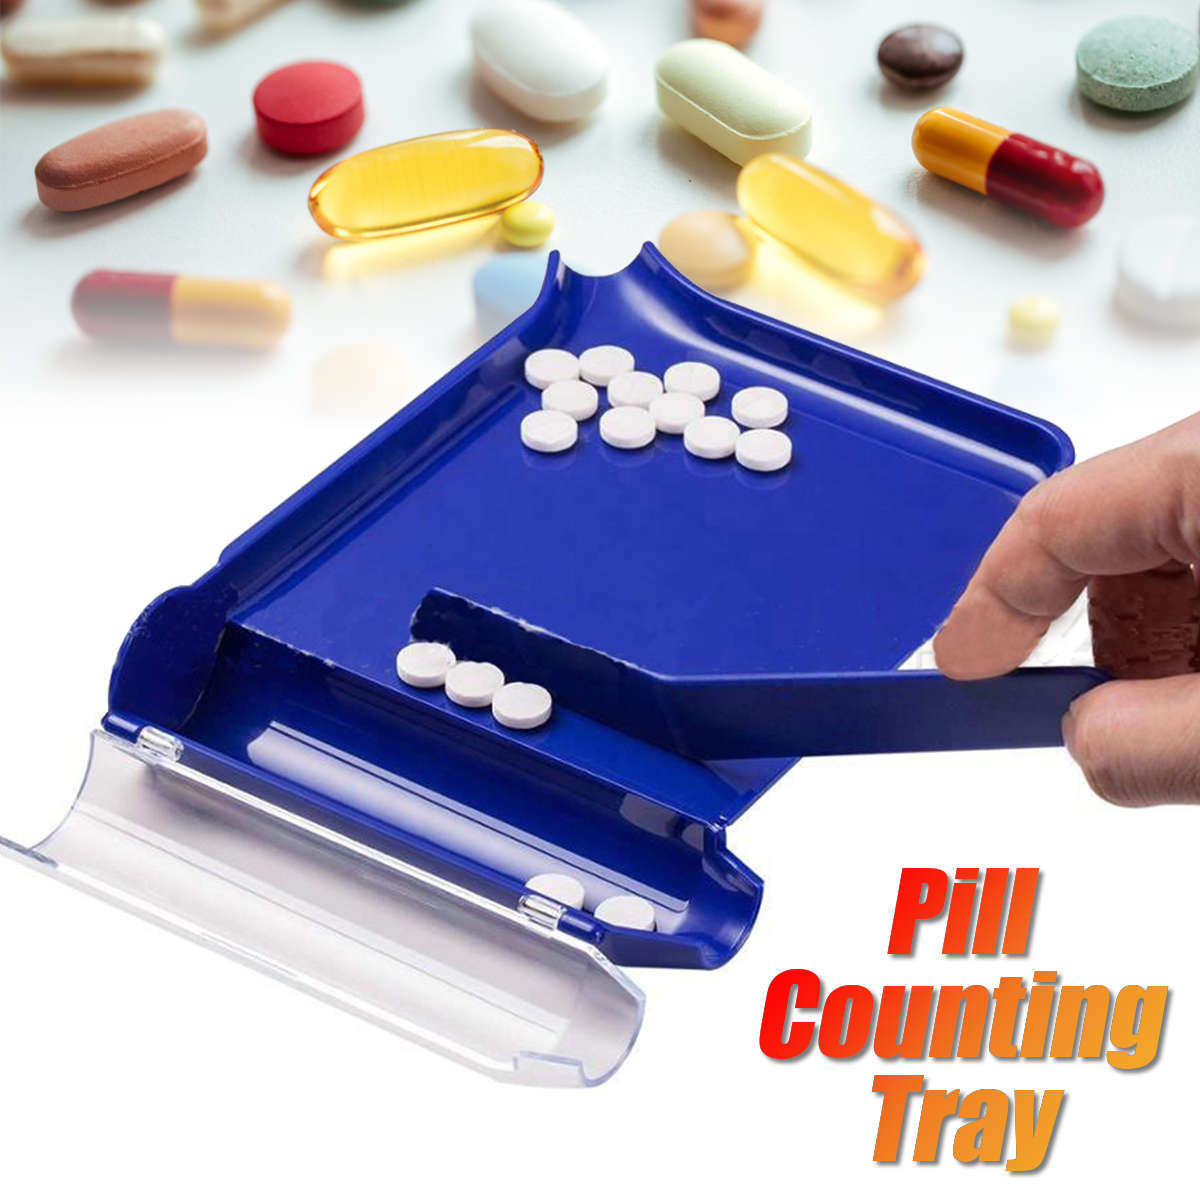 Pill-Counting-Tray-Durable-Plastic-Practical-Dispenser-For-Pharmacists-Pharmacy-Doctor-1676645-1